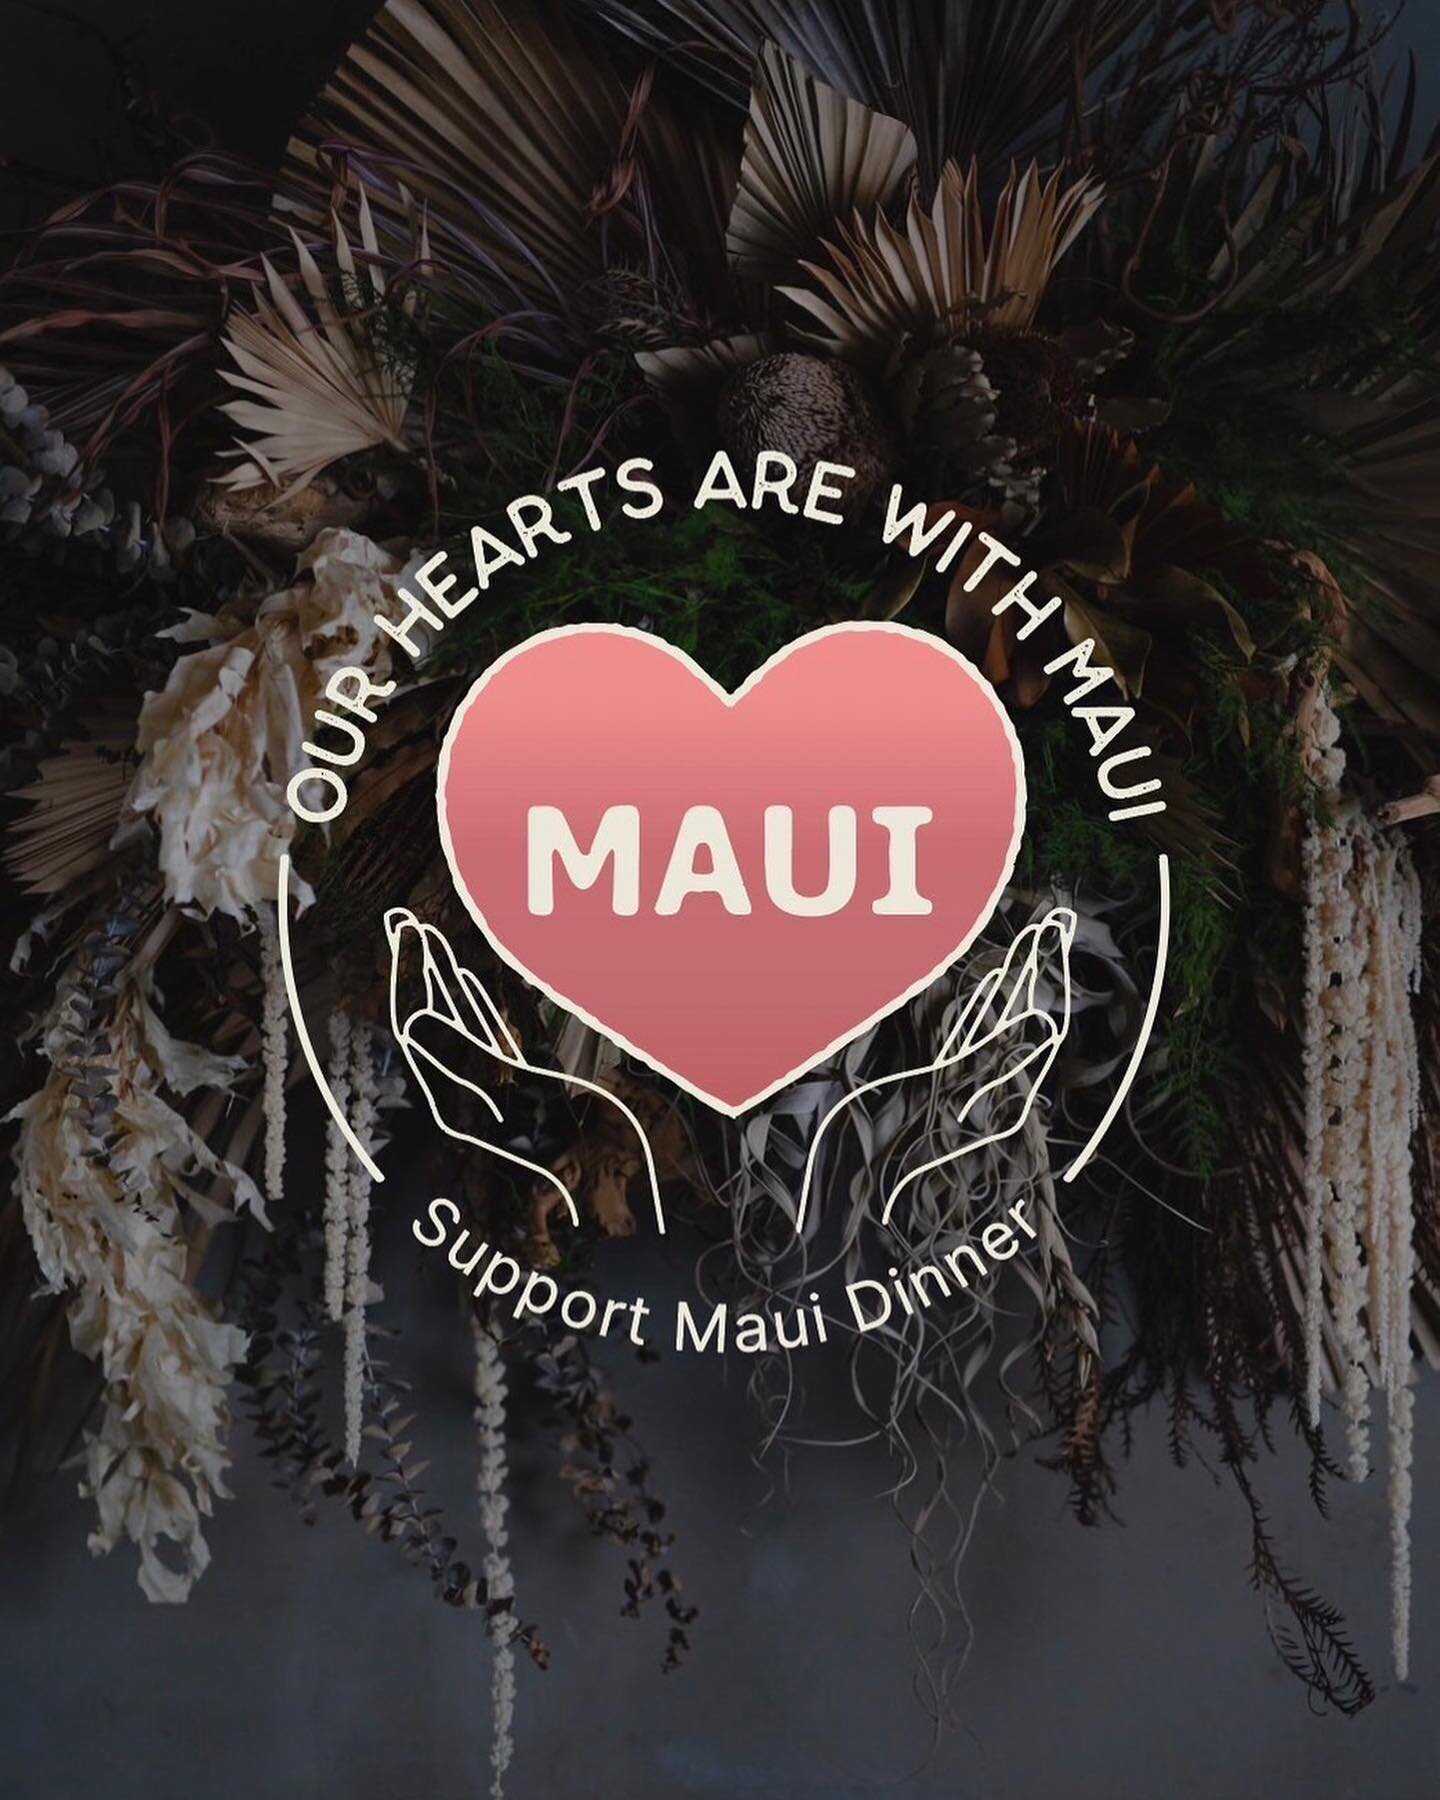 🌺Support Maui Donation Dinner August 29th, 2023🙏🏽

Our sincerest thoughts and prayers go out to Maui.

Words cannot fully describe the devastation that has impacted our Ohana on this beautiful island.

As we move through the road ahead, we want to